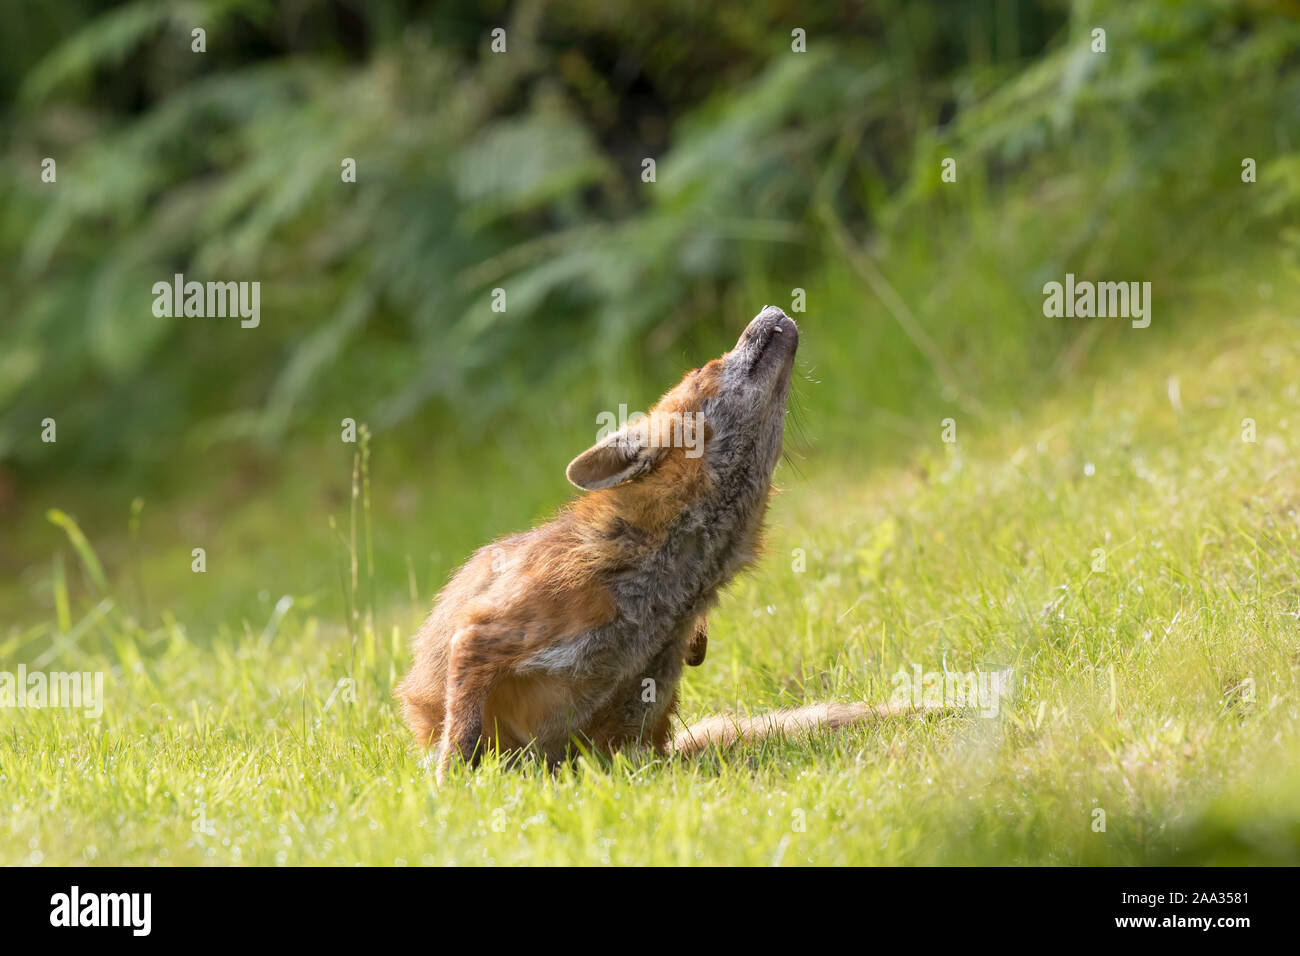 Detailed front view close up, young UK red fox (Vulpes vulpes) isolated in summer countryside, sitting in long grass having a scratch. Low angle view. Stock Photo